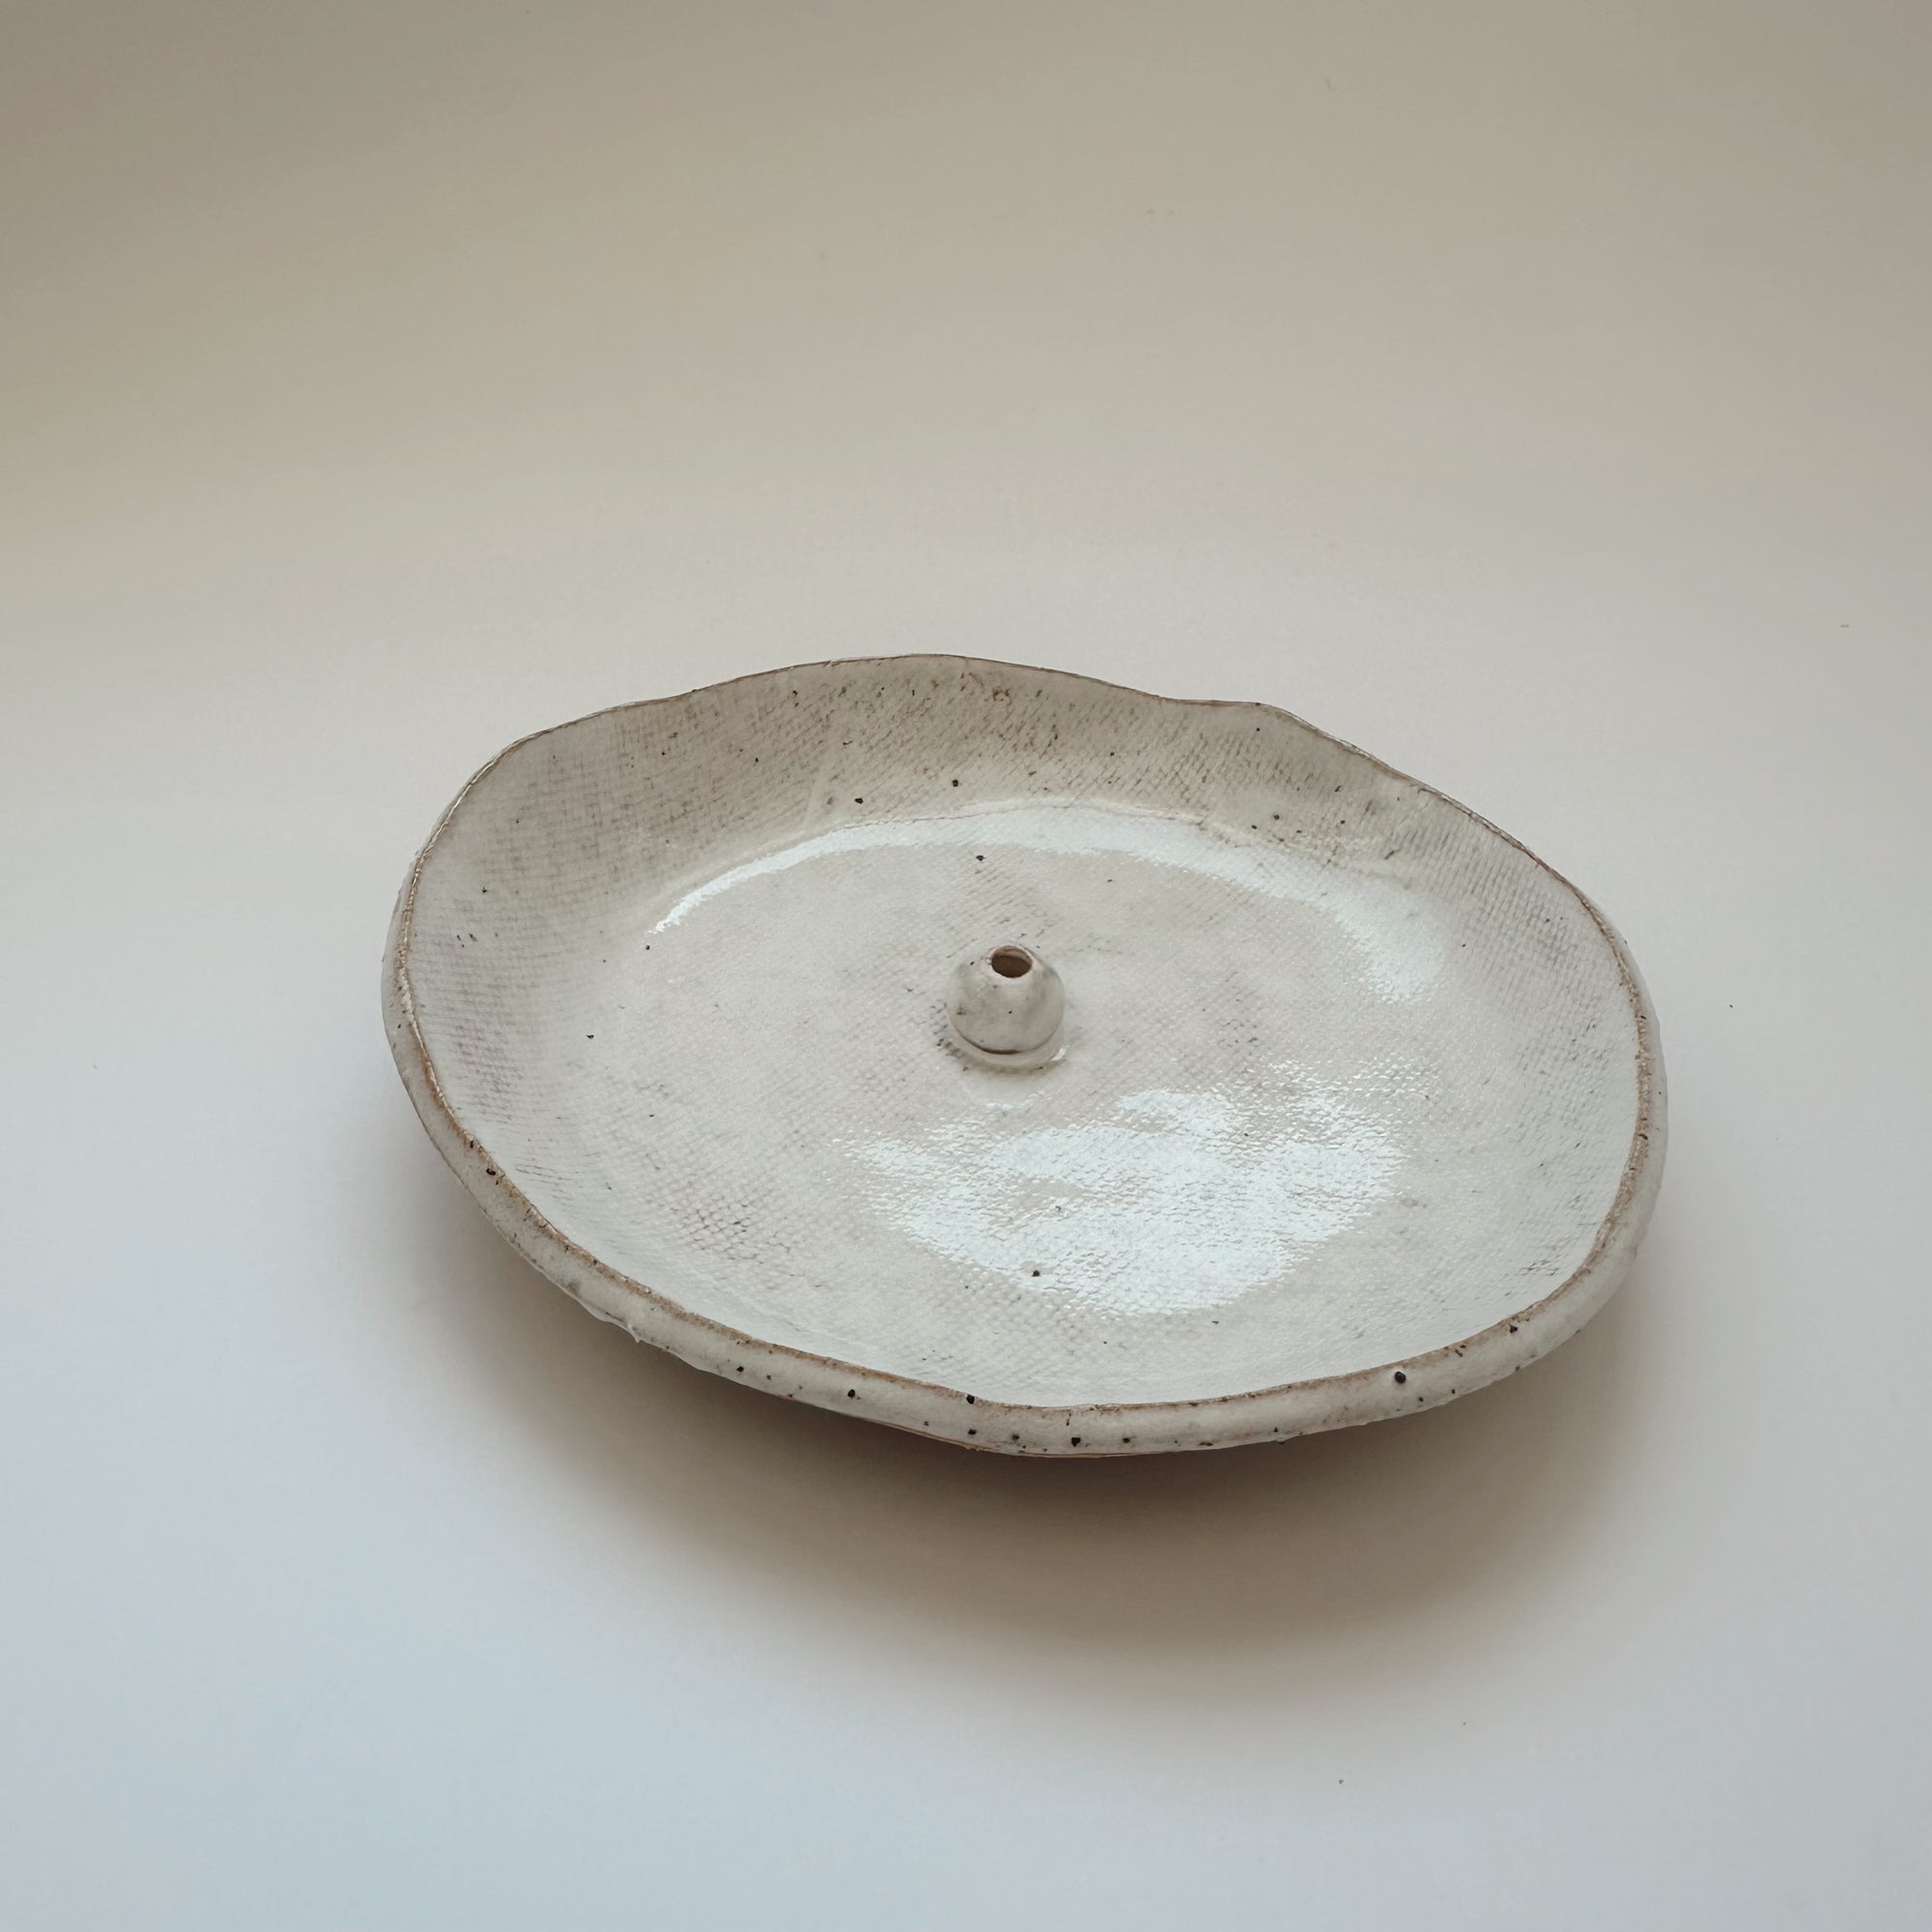 THE CLAY SOCIETY ORGANIC ROUND INCENSE HOLDER: WHITE